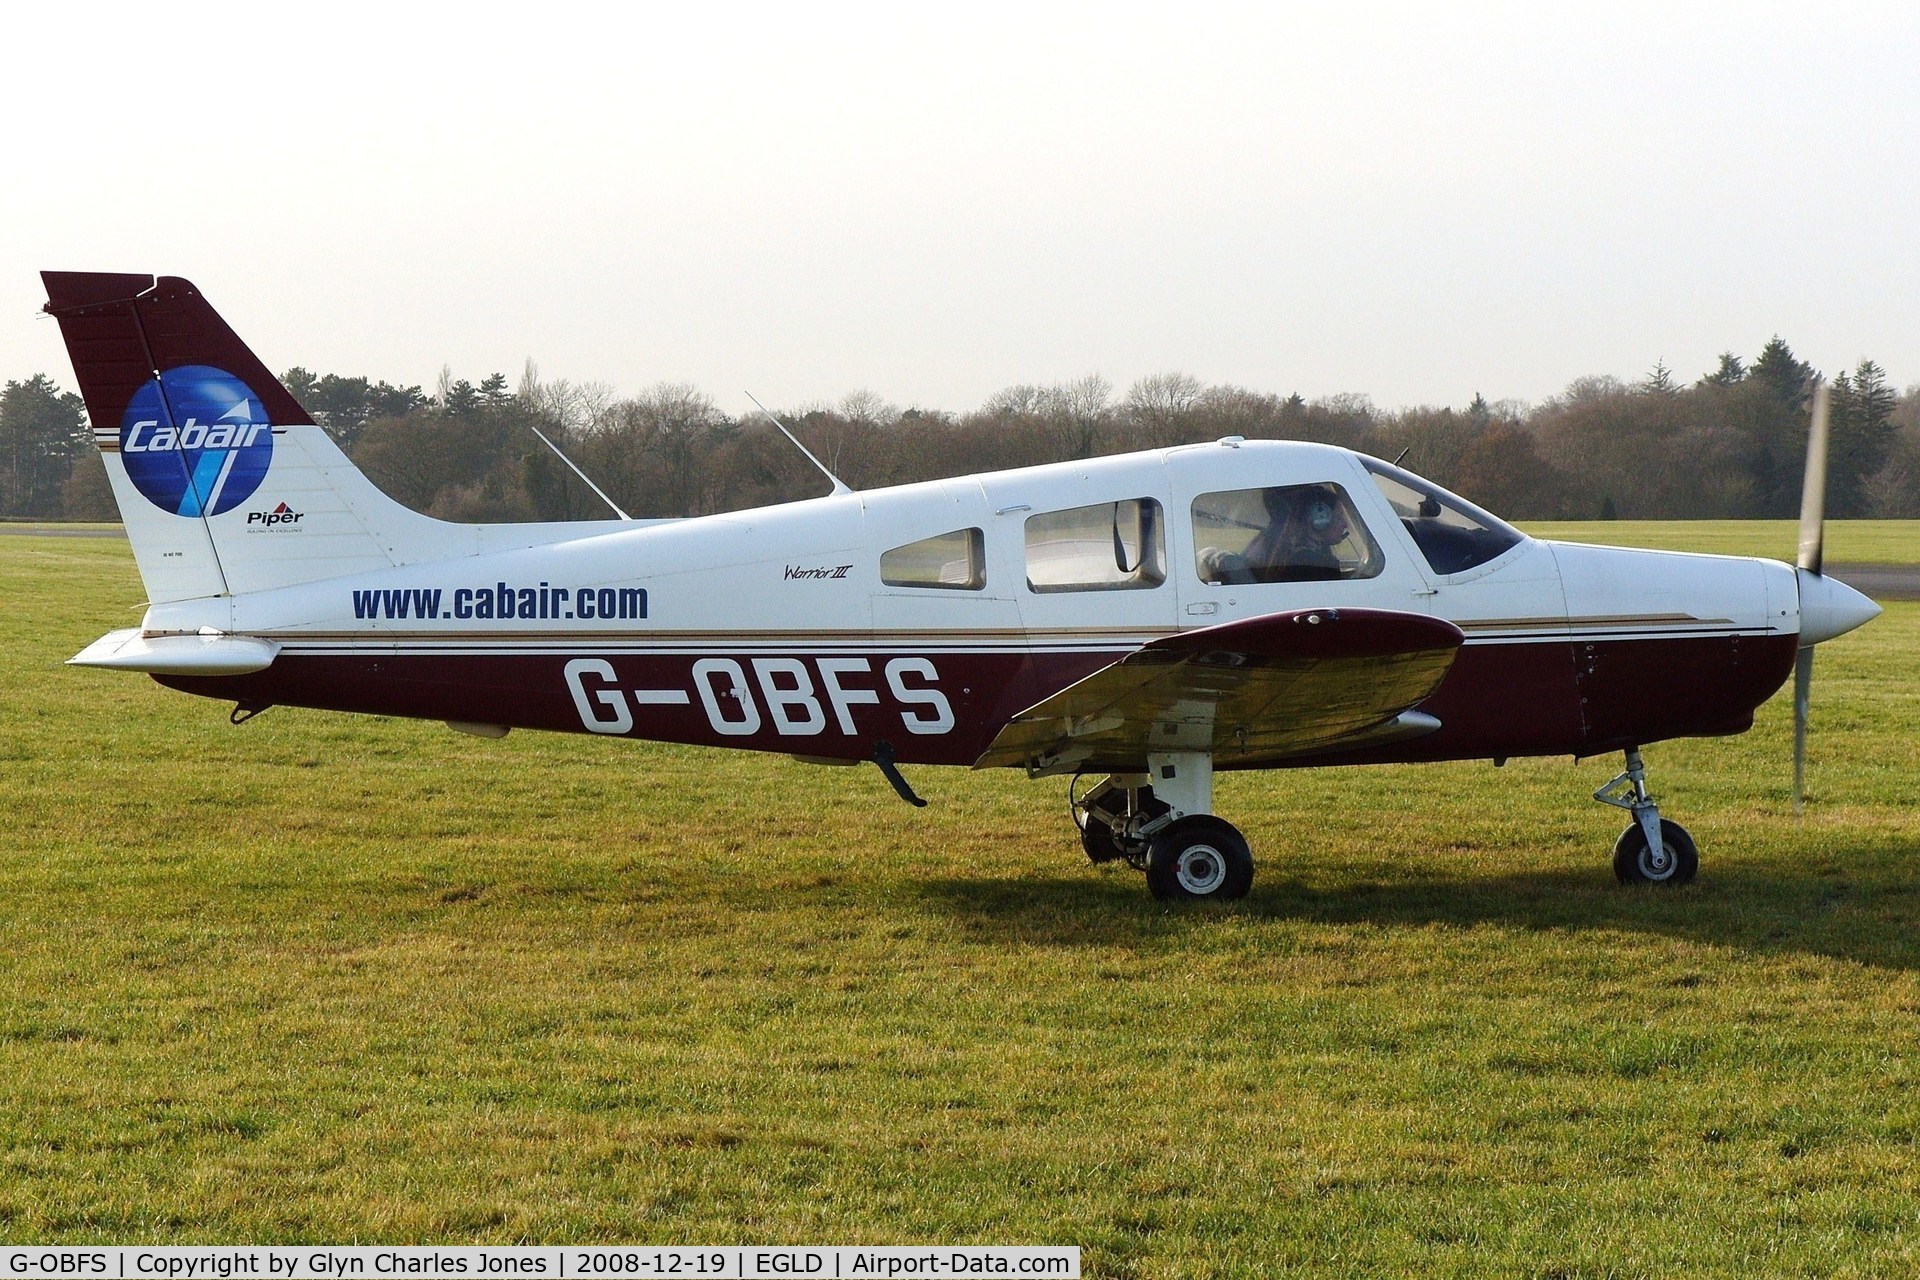 G-OBFS, 1998 Piper PA-28-161 Warrior III C/N 28-42039, Awaiting clearance to line up and take off on runway 24. Previously N41274. In memory of pilot Michael Stephen Owen who was killed aged 29 in Cessna F150G G-AVPG at Denham exactly 40 years ago on December 19, 1968. Operated by Cabair.